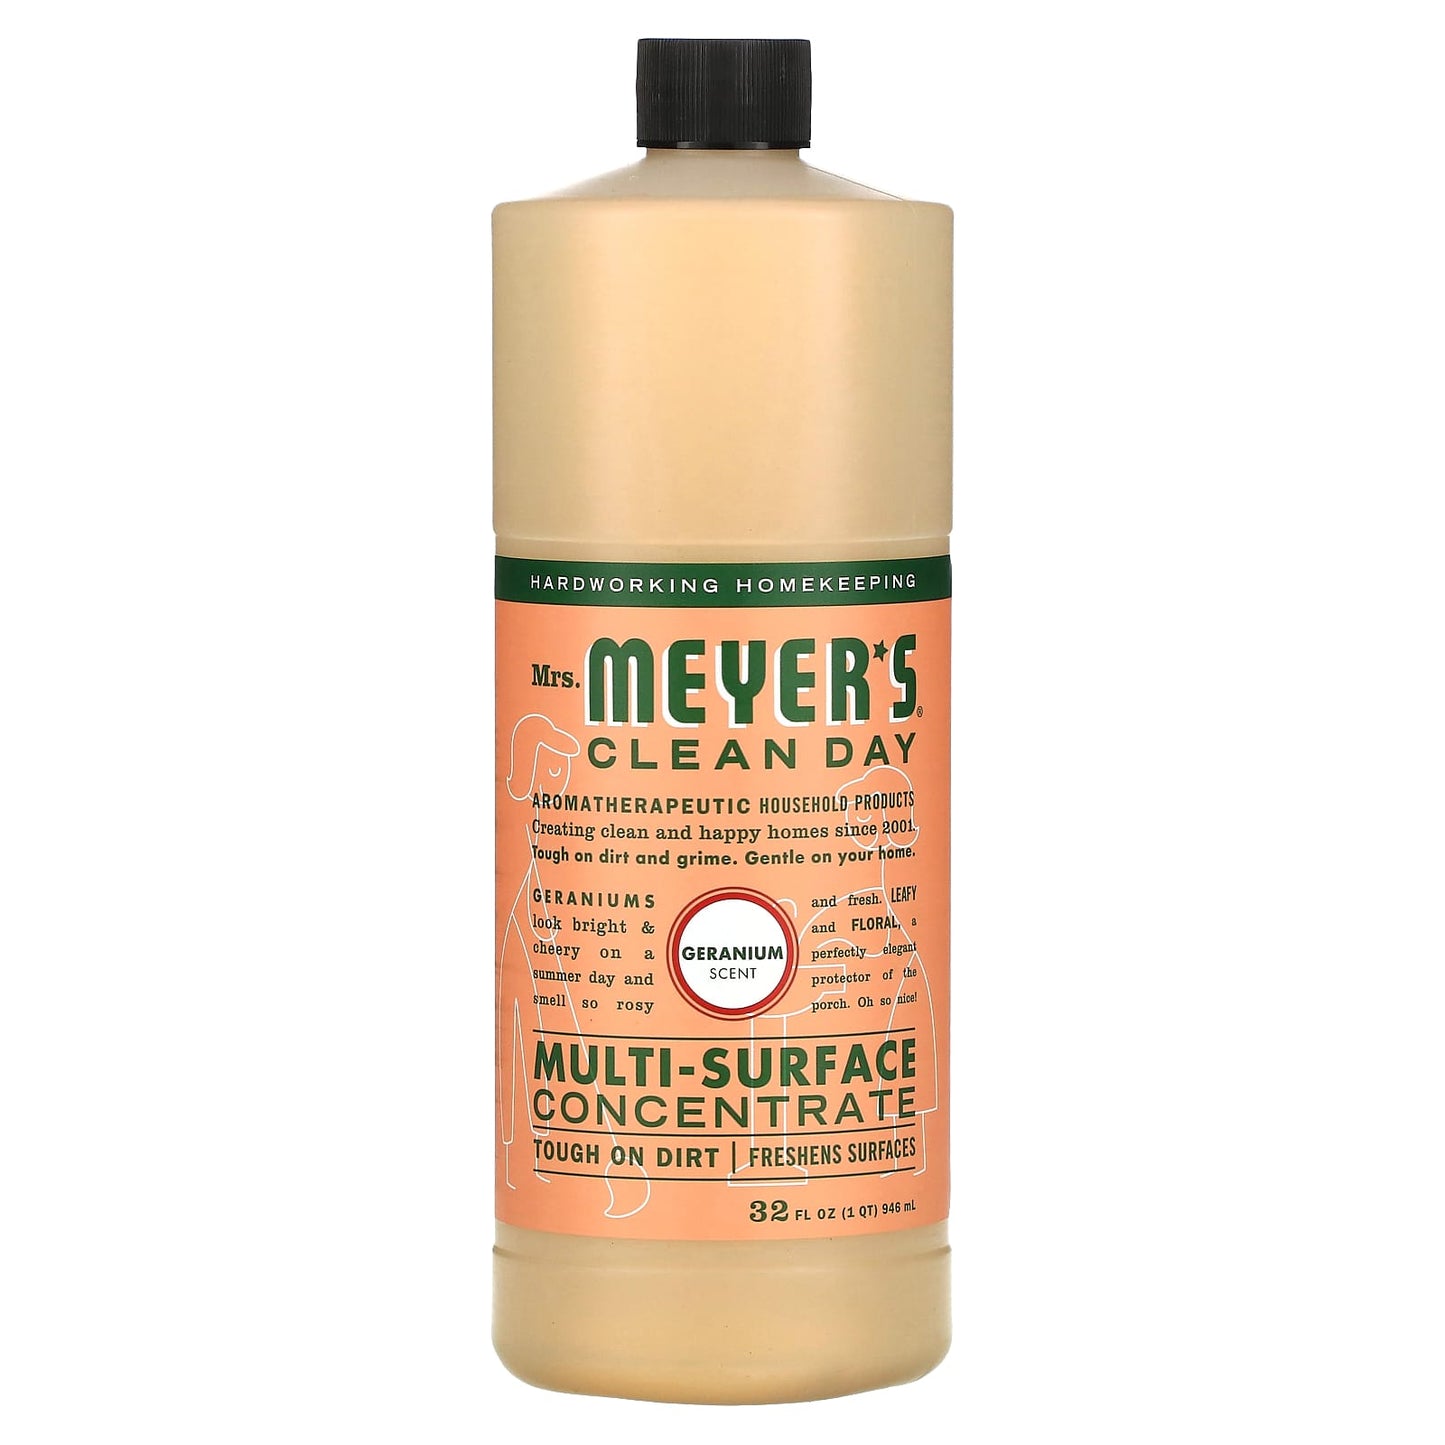 Mrs. Meyers Clean Day-Multi-Surface Concentrate-Geranium-32 fl oz (946 ml)